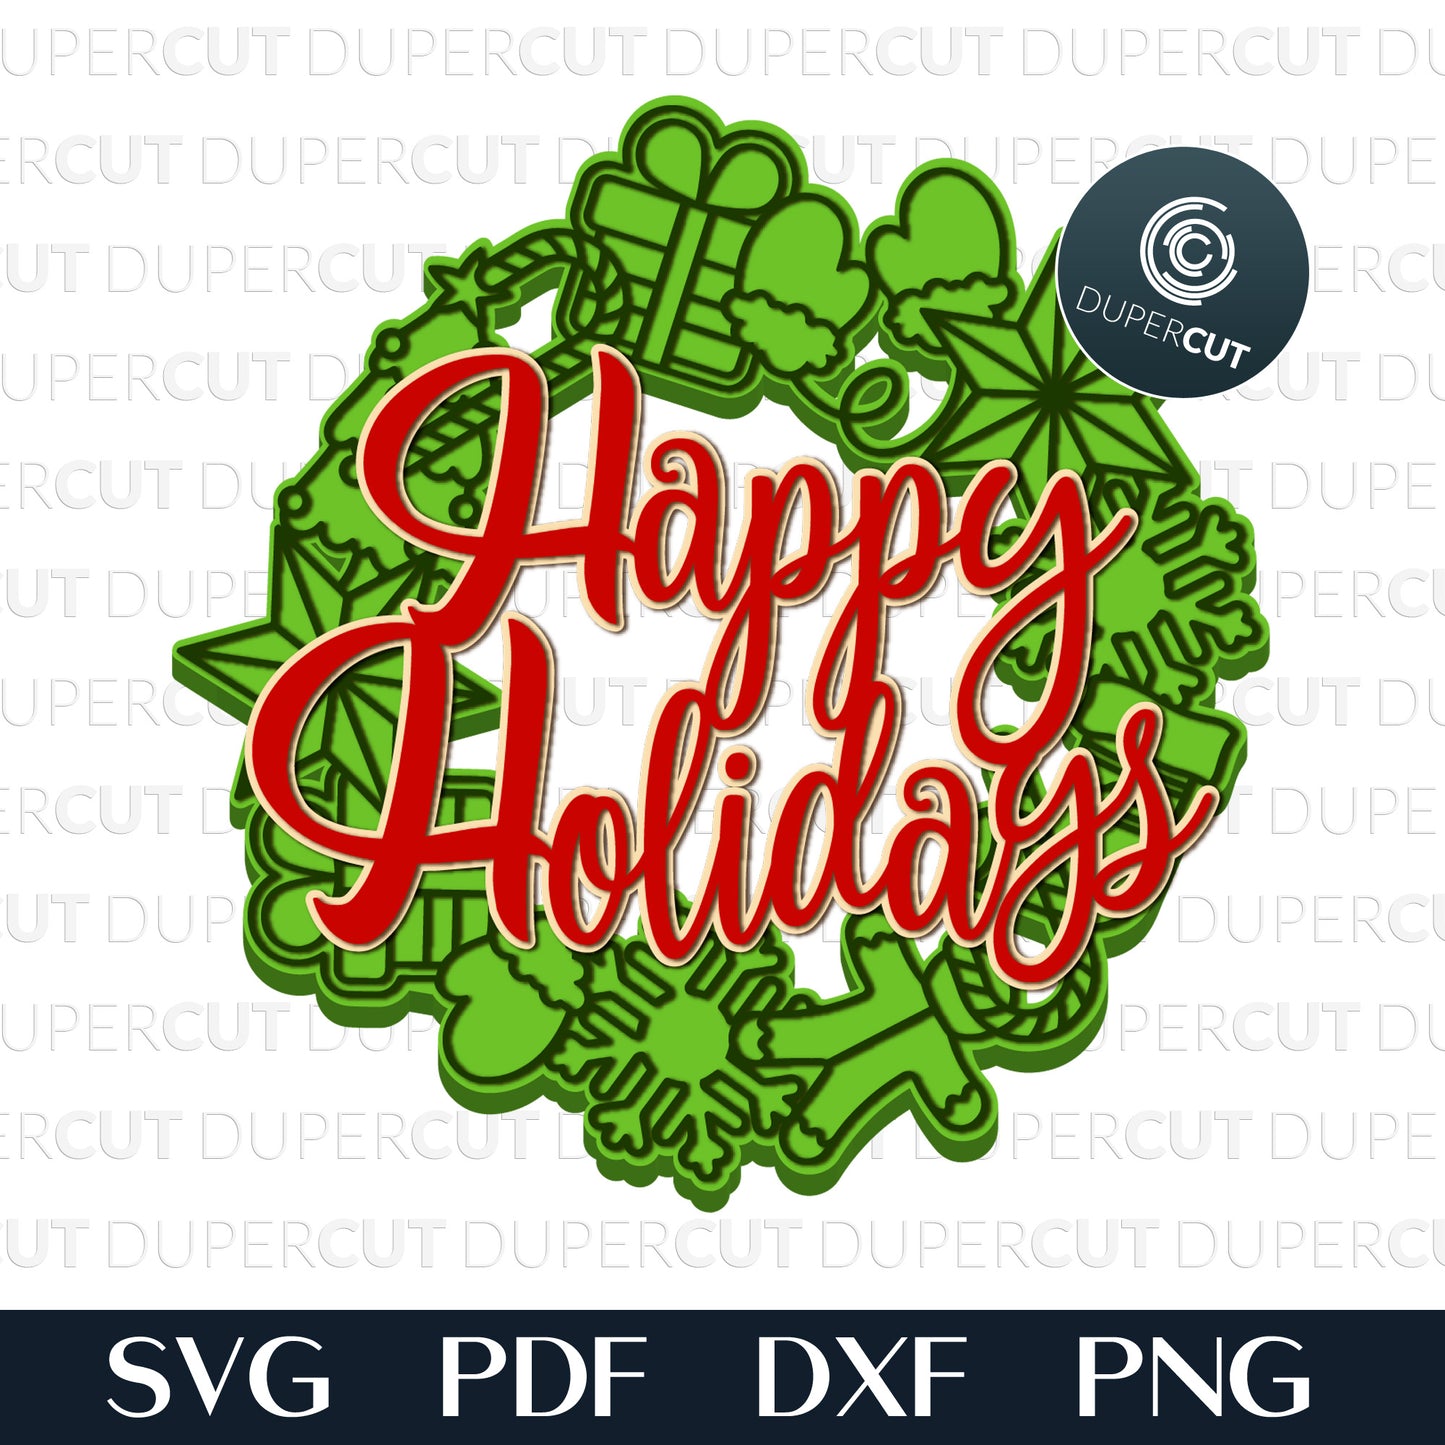 Happy holidays wreath door hanger - SVG PDF DXF layered files for laser and digital cutting machines - Glowforge, Cricut, Silhouette, CNC plasma by DuperCut